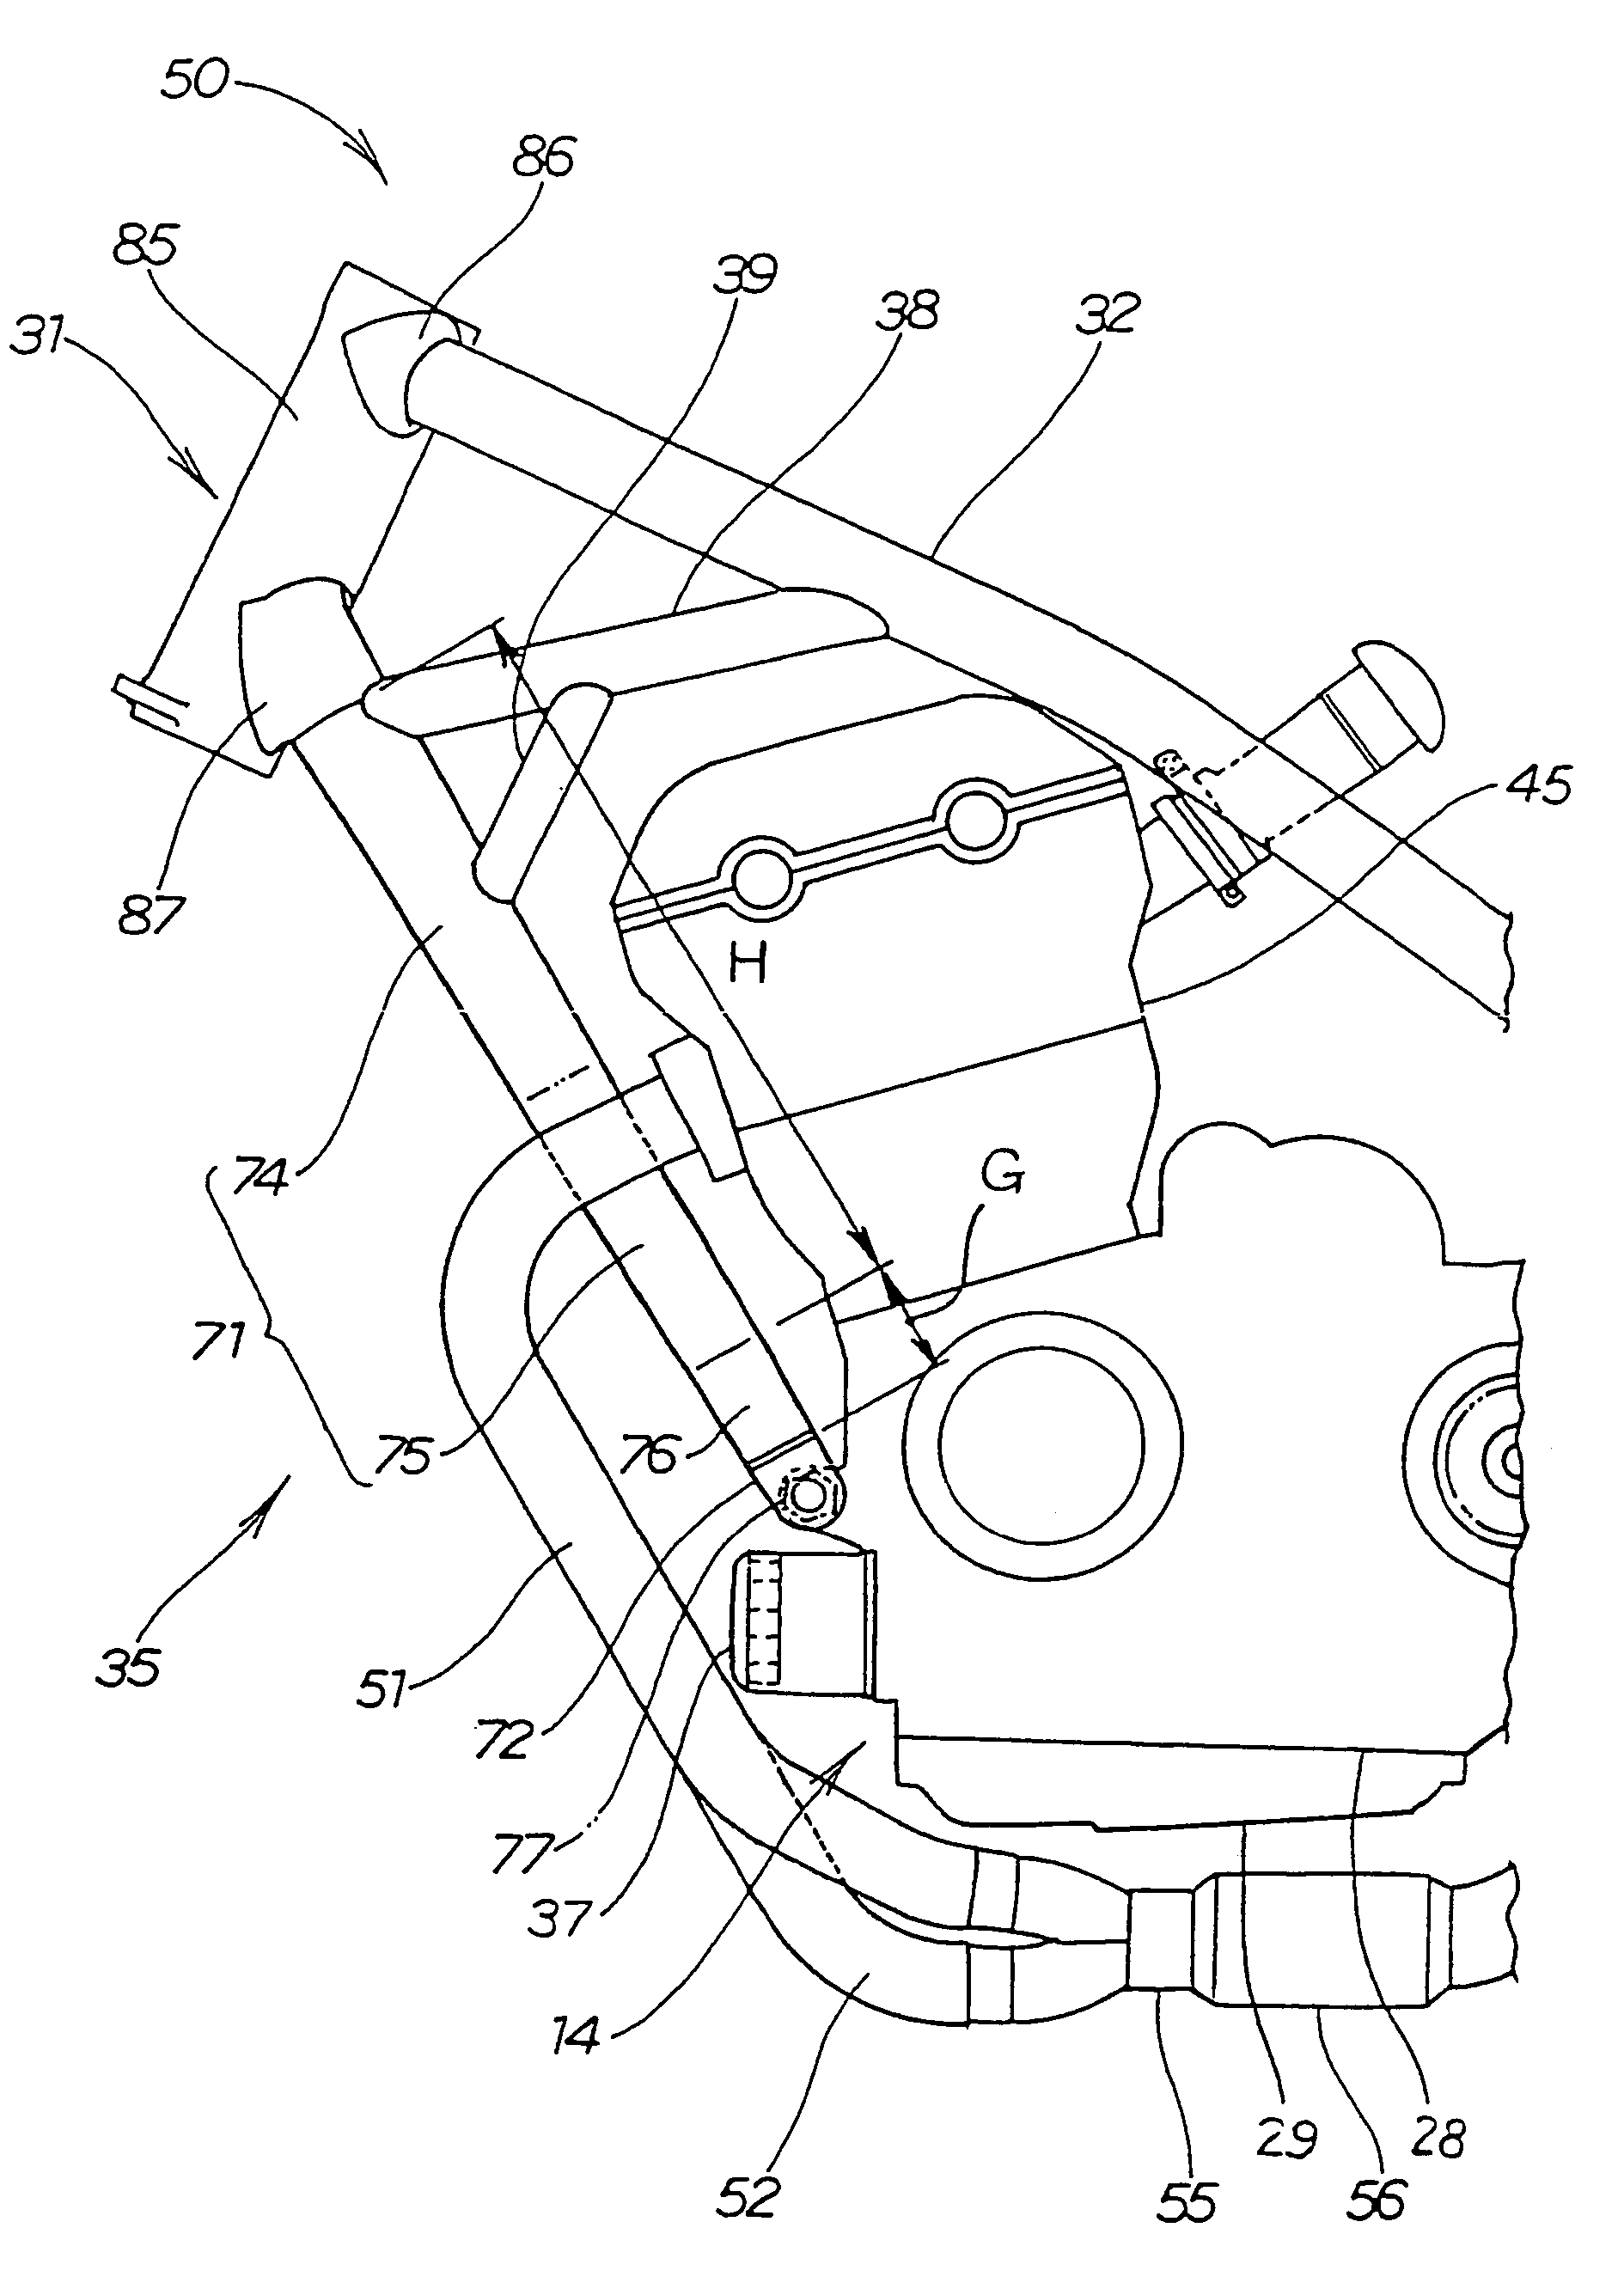 Vehicle body structure for motorcycle